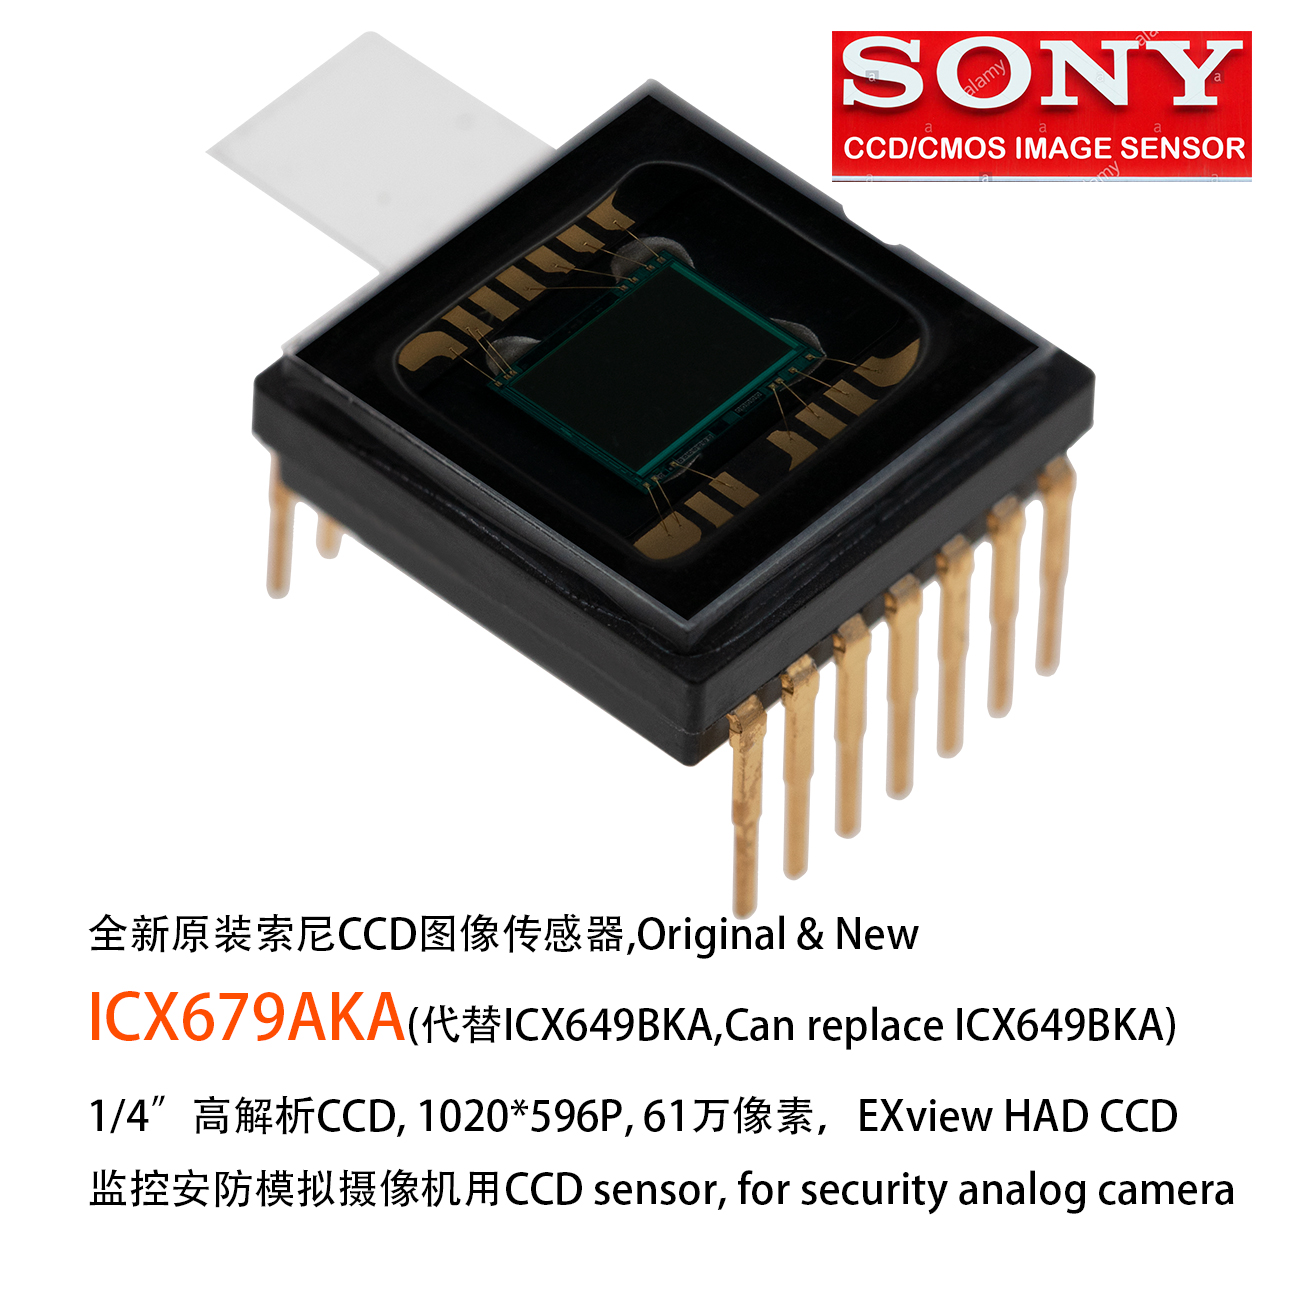 ICX679AKA，SNOY 1/4 CCD Image Sensor，for PAL Color security Video Cameras CCD sensor，610KP analog CCD  image sensor，SONY WDR CCD,SONY Super HAD CCD, SONY WDR CCD SENSOR，SONY high resolution 600Kpixel CCD, security camera color CCD image sensor, can replace ICX649BKA, upgrade of ICX649BKA products,